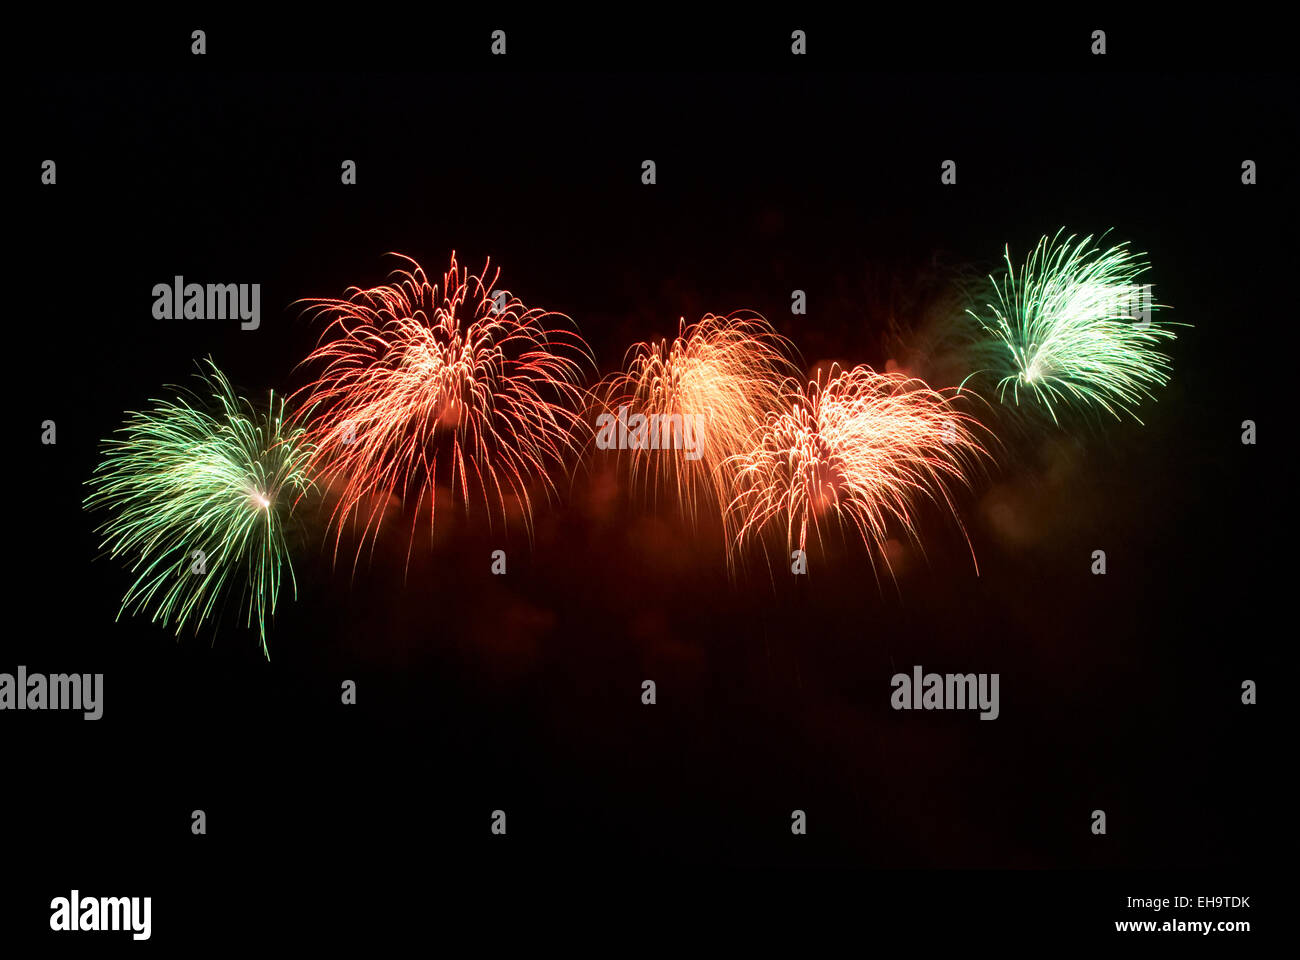 Beautiful salute and fireworks with black sky background. Stock Photo